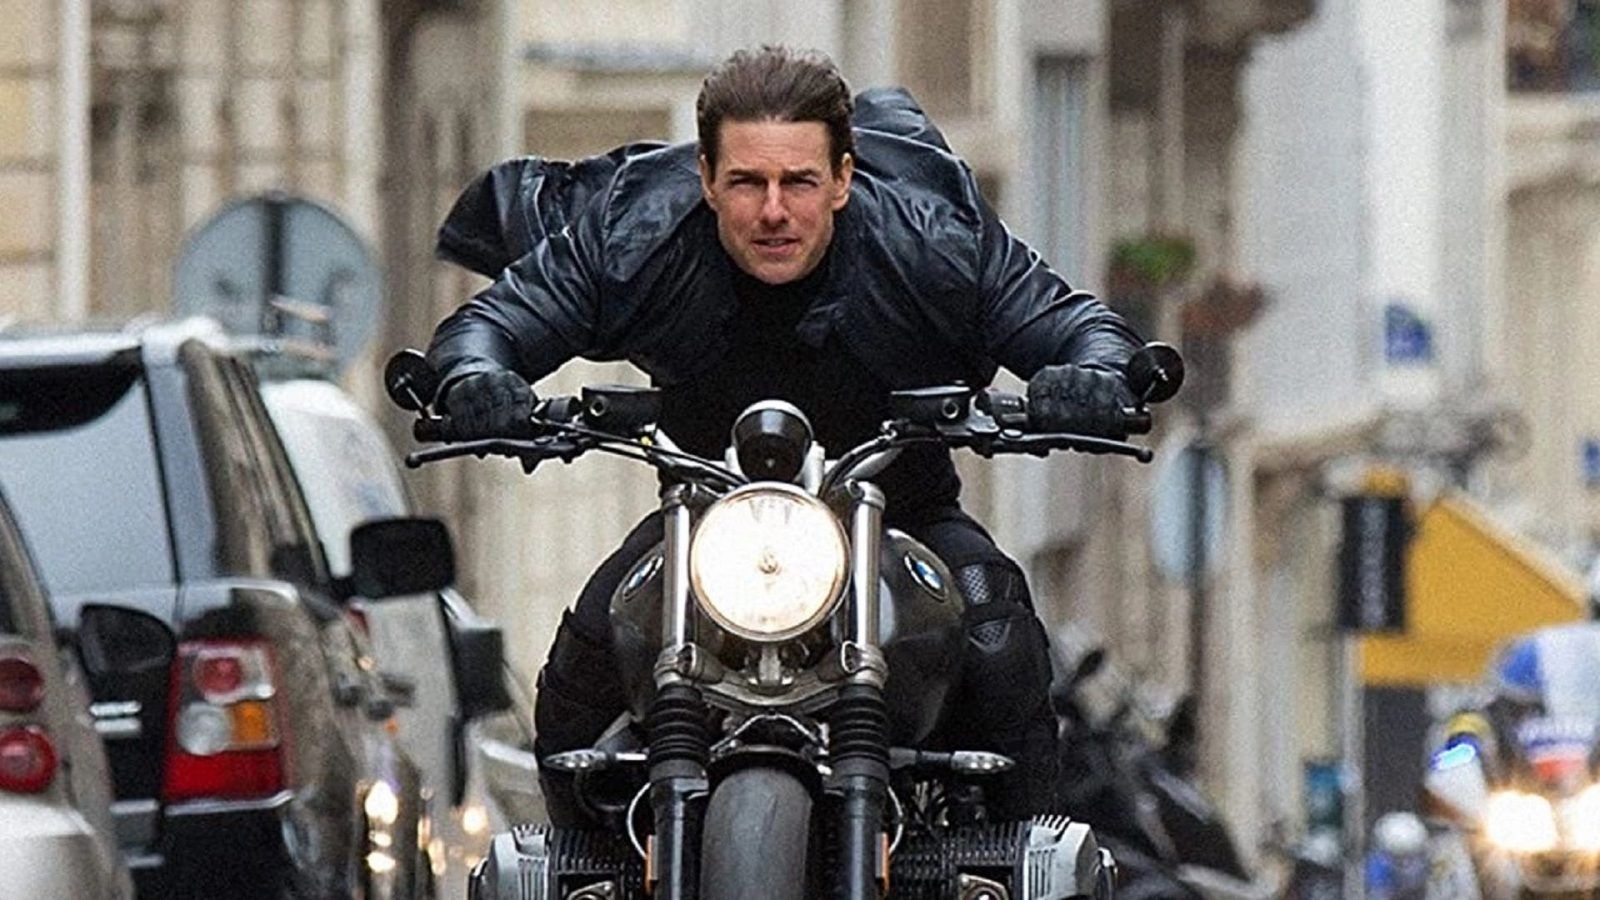 Visit these Mission: Impossible shooting locations around the world